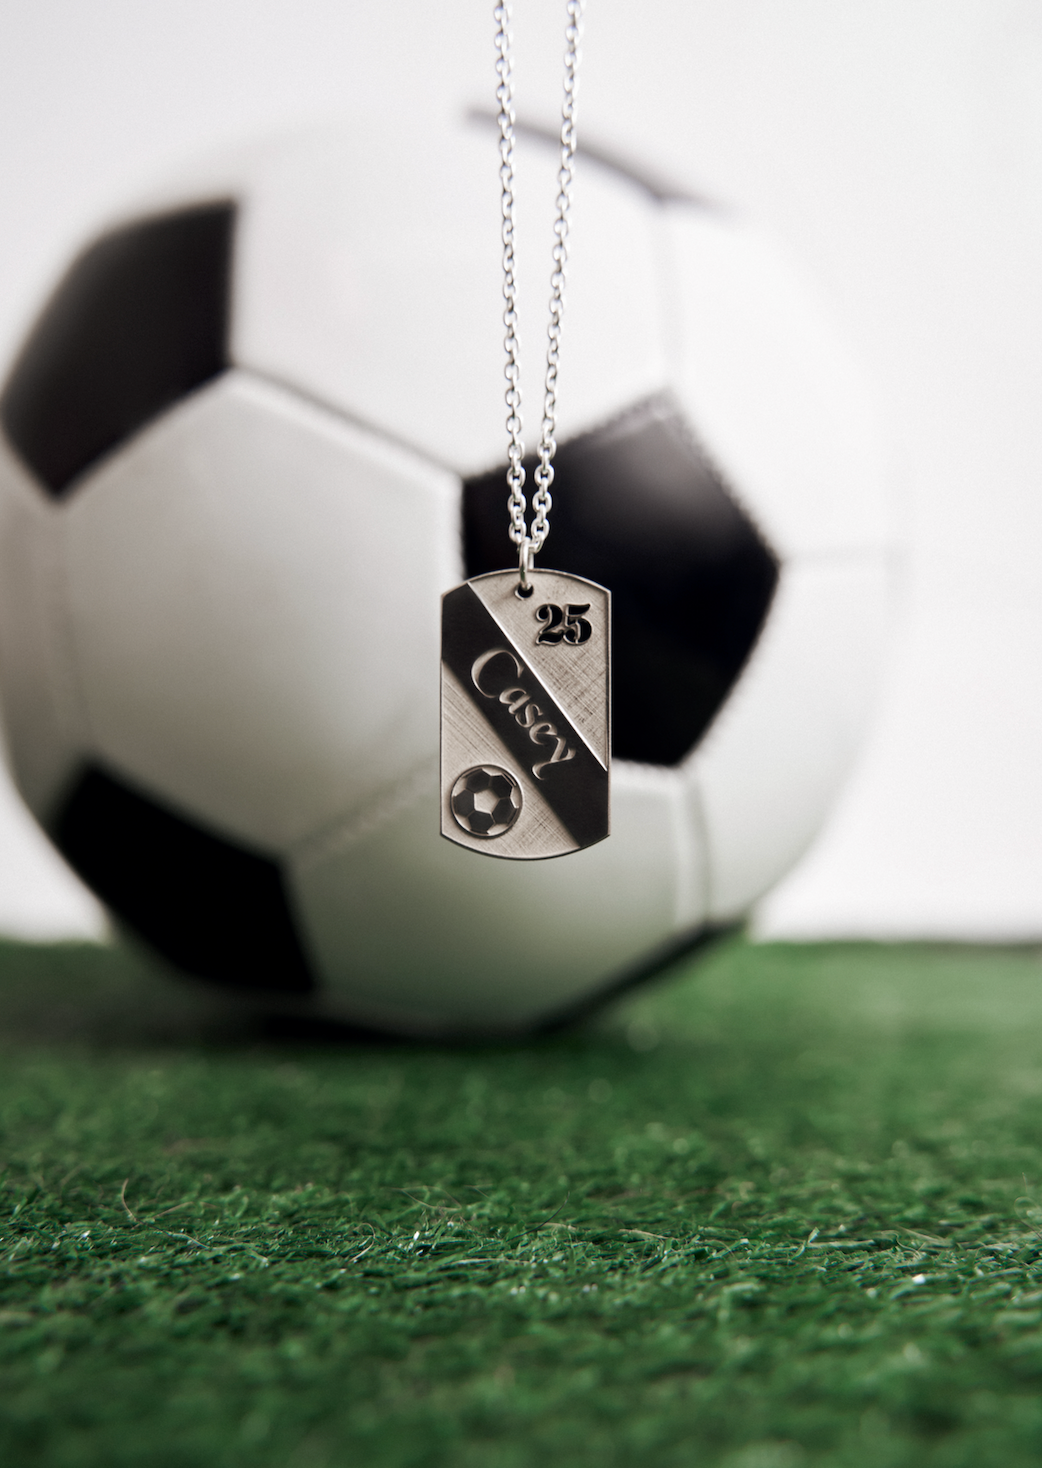 Sports Game Silver Soccer Shoe Football Pendant Locket Necklace With Ball  Chain Silver Stainless Steel